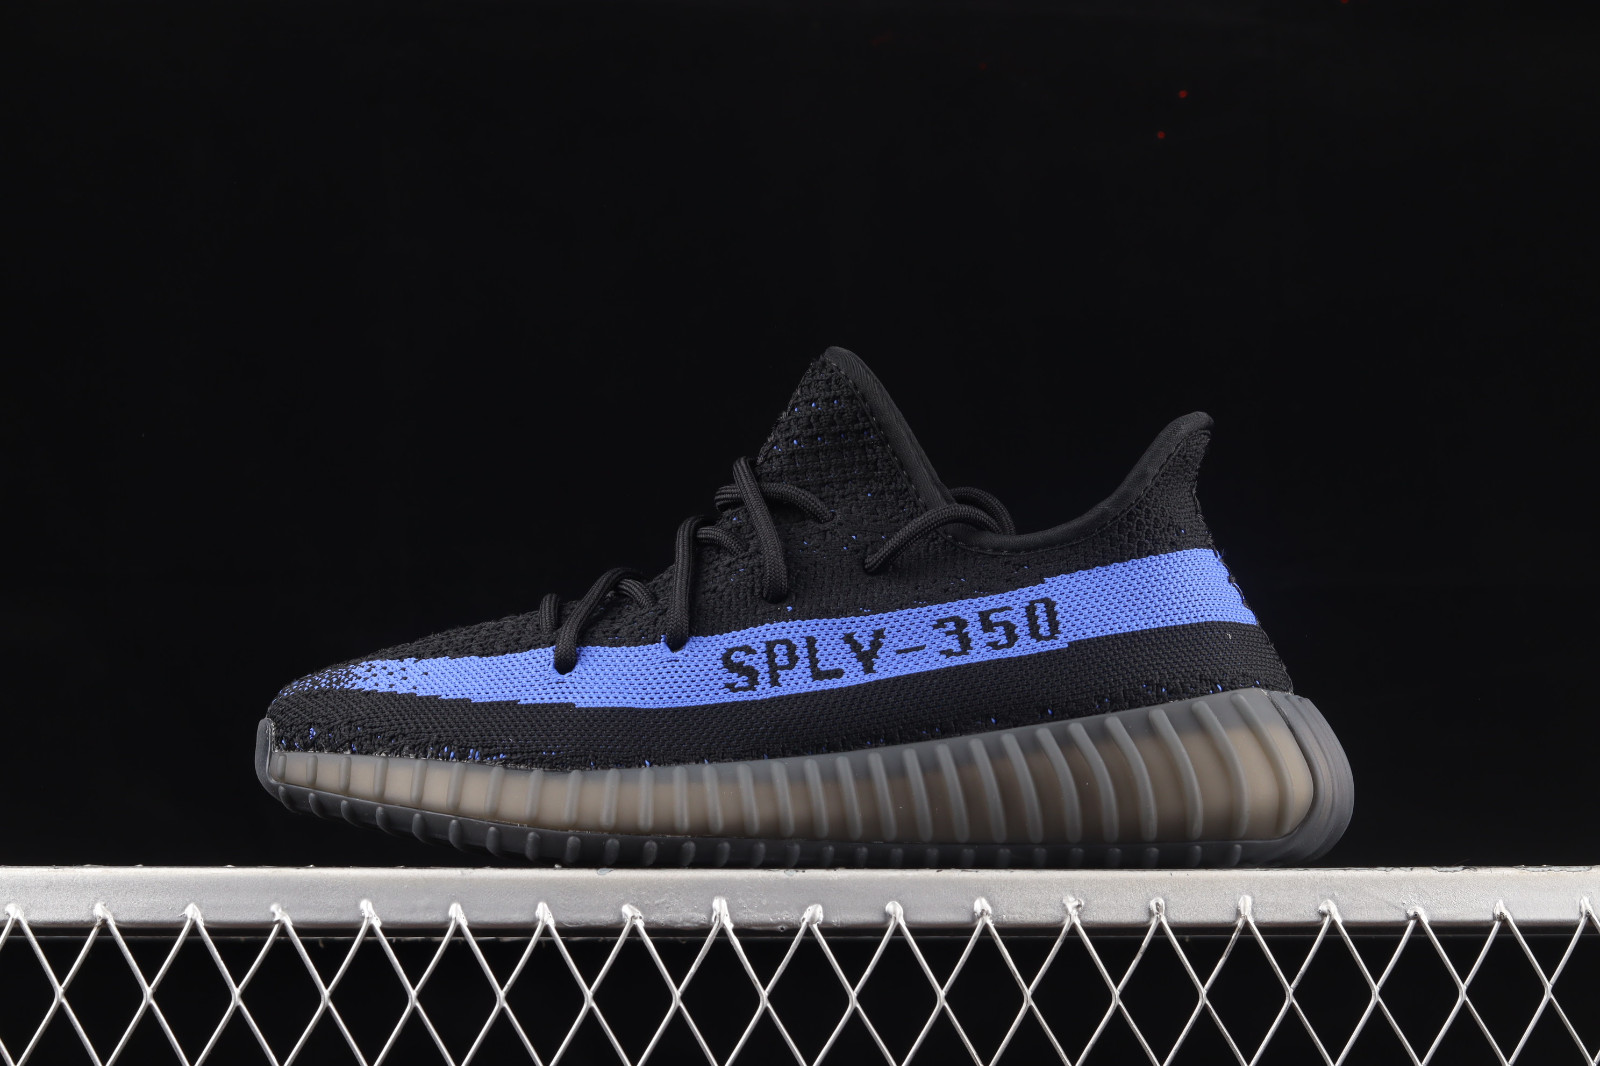 fordom mere og mere elev Sepsale - yeezy early links for sale in texas today news - Adidas Yeezy 350  Boost V2 Core Black Purple Shoes GY7164